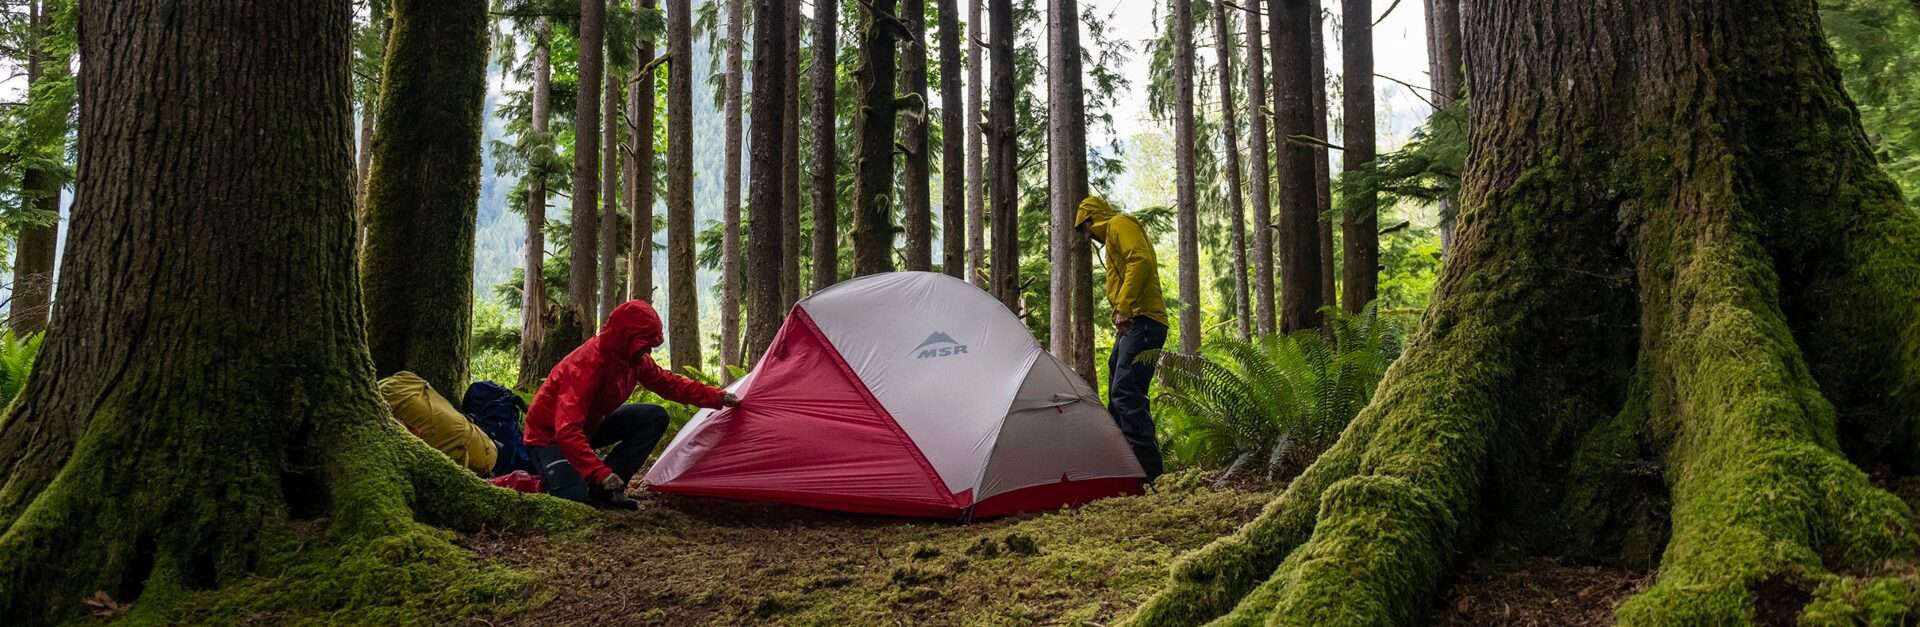 The MSR Hubba Hubba 2 person tent being tested out camping in a forest